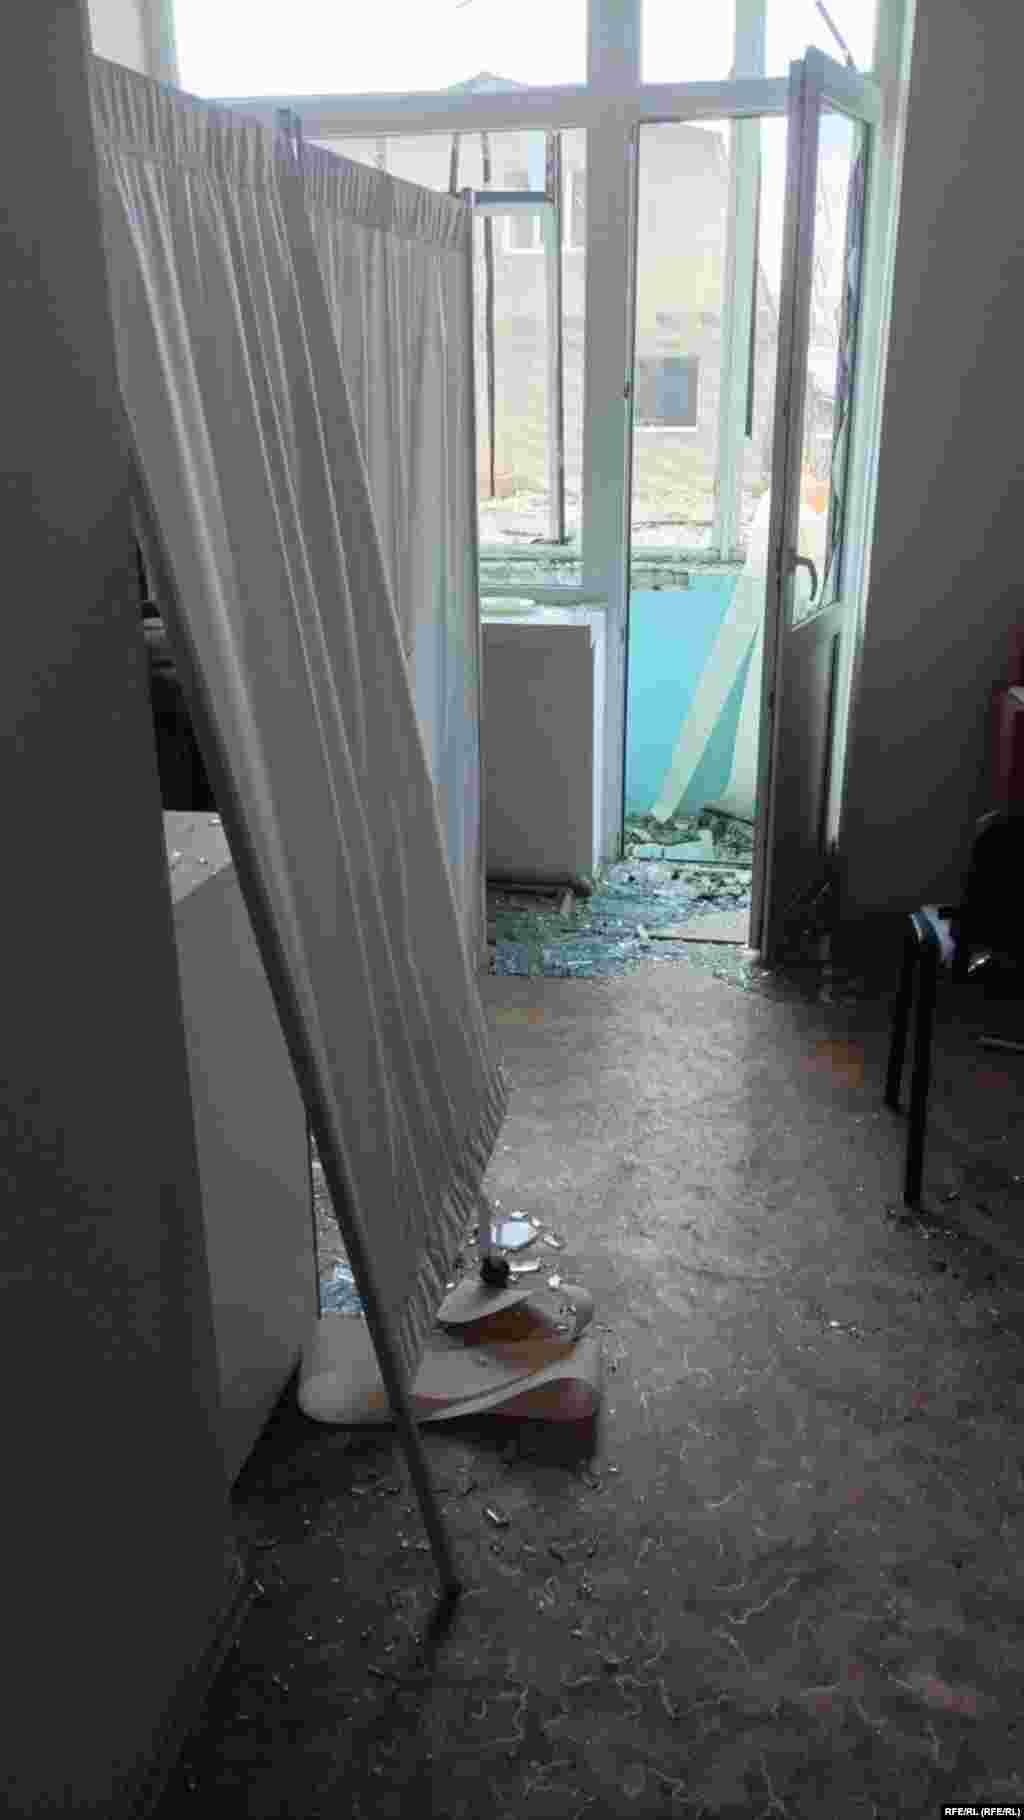 The missile strike caused widespread damage to residential areas, with many windows and doors blown out.